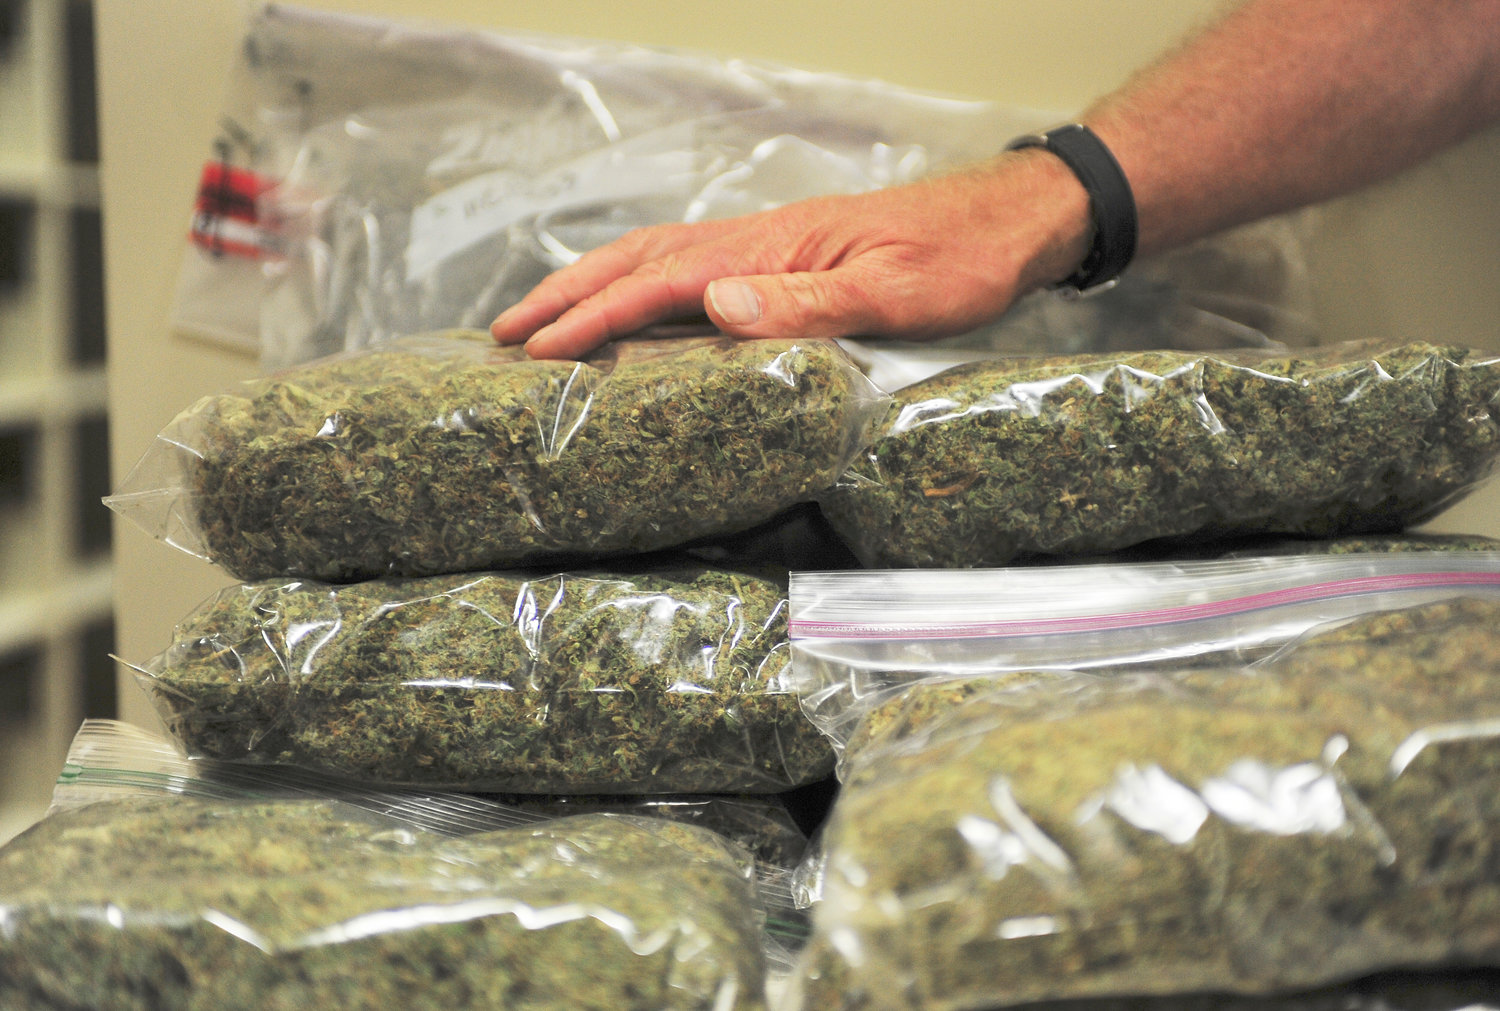 Police-seized marijuana is shown in this Chronicle file photo.